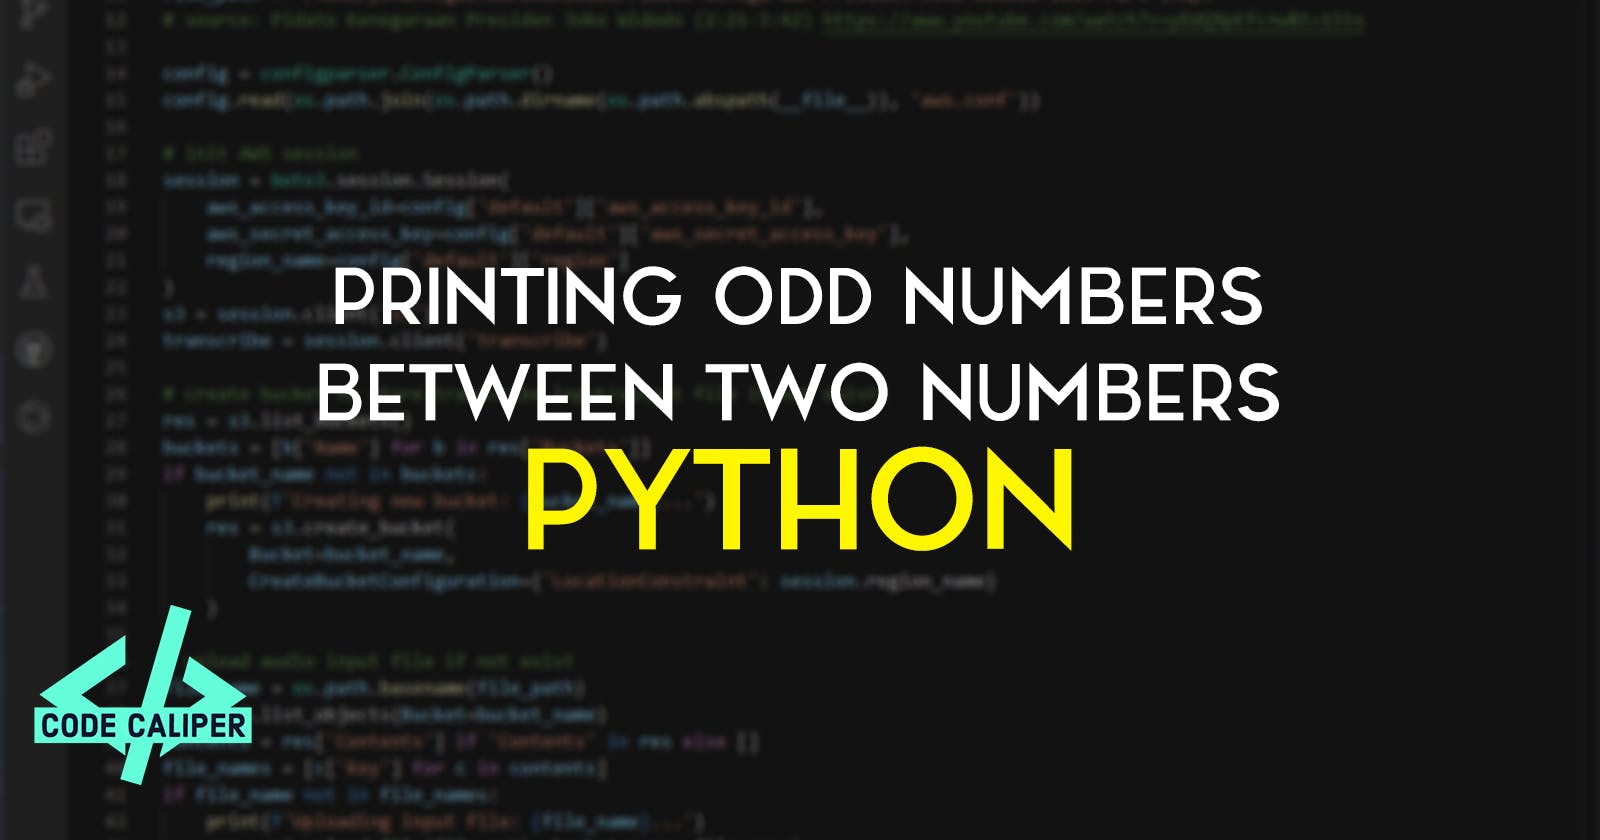 Printing Odd Numbers Between Two Numbers in Python